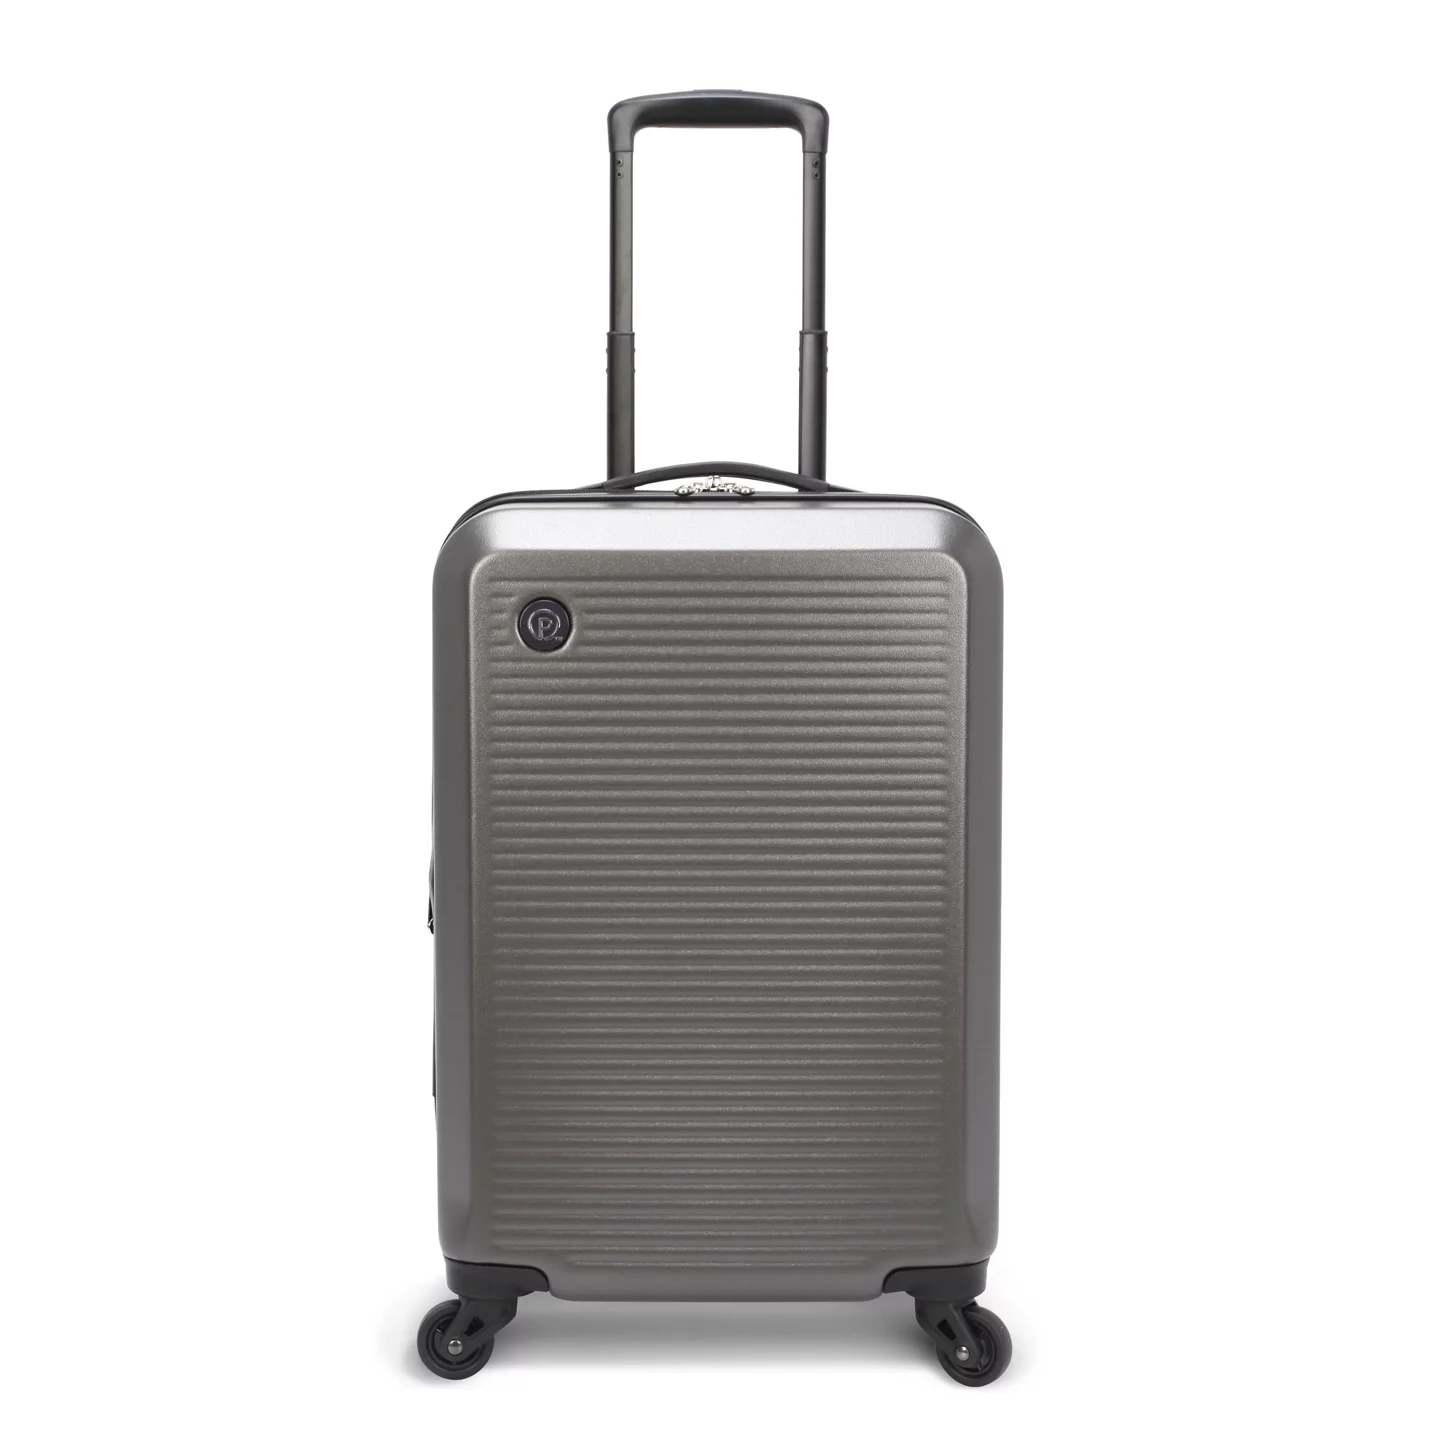 Protege 20 Inch Hard Side Carry-on Spinner Luggage, Matte Gray (Exclusive)